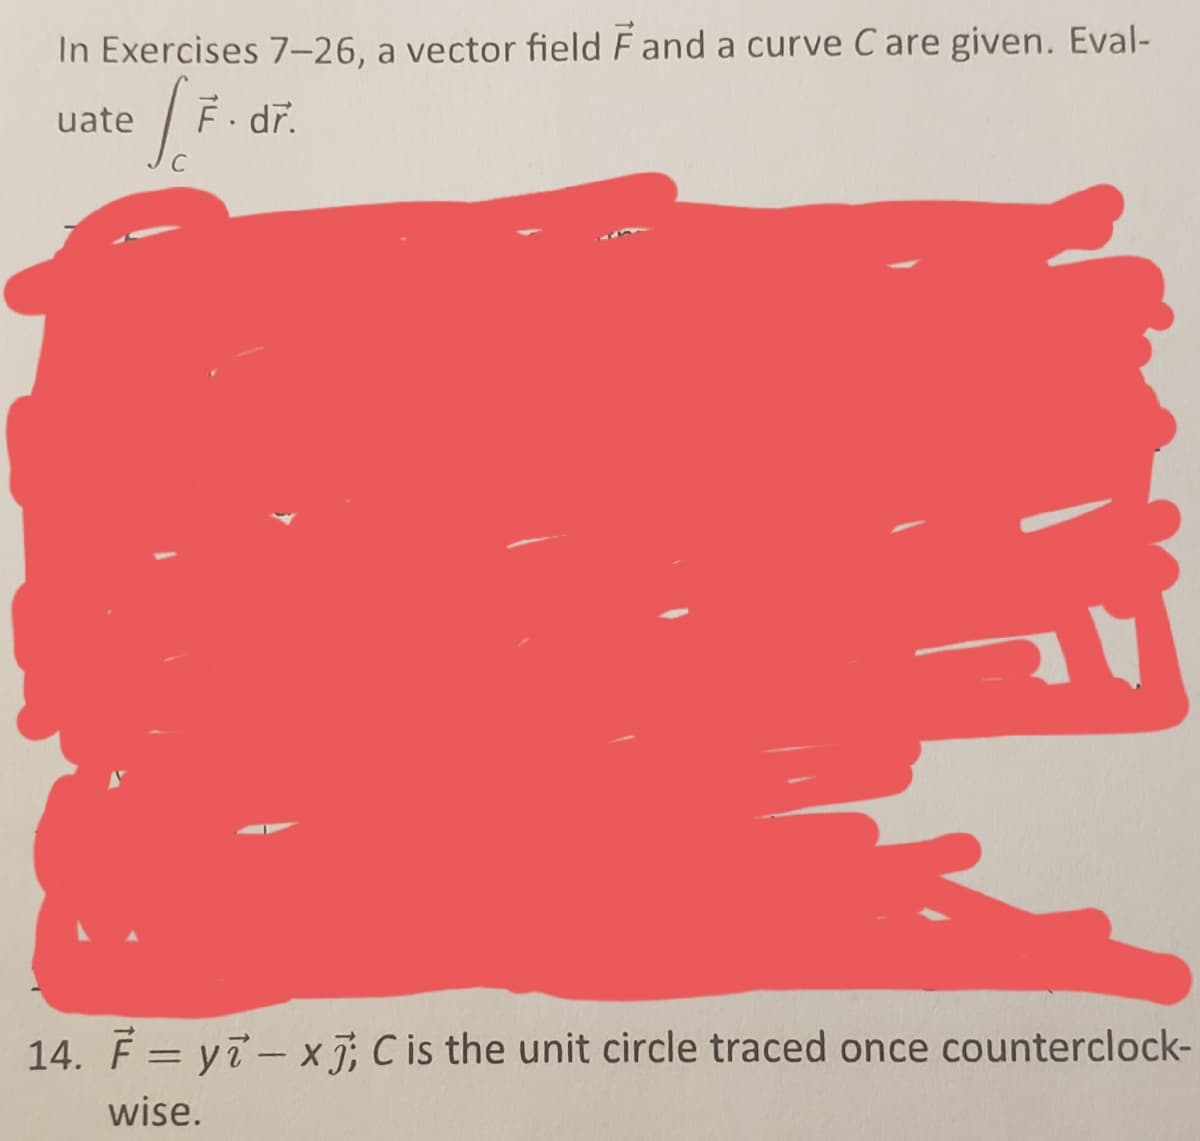 In Exercises 7-26, a vector field F and a curve C are given. Eval-
uate
= [F.
F. dr.
14. F = yi-x7; C is the unit circle traced once counterclock-
wise.
F